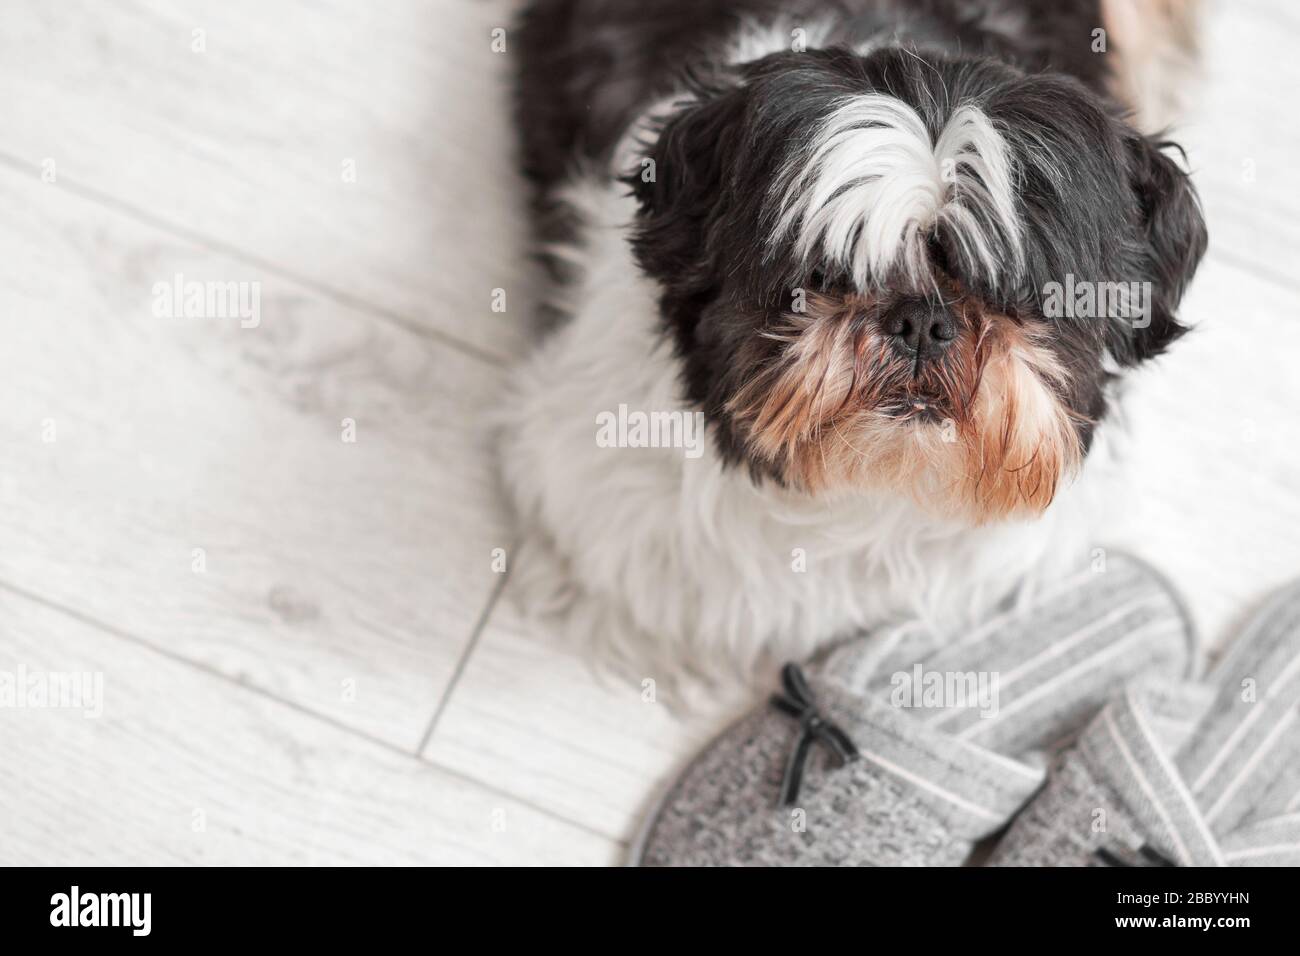 Funny dog, Shih Tzu breed. Sits on a white floor near home slippers. Stock Photo